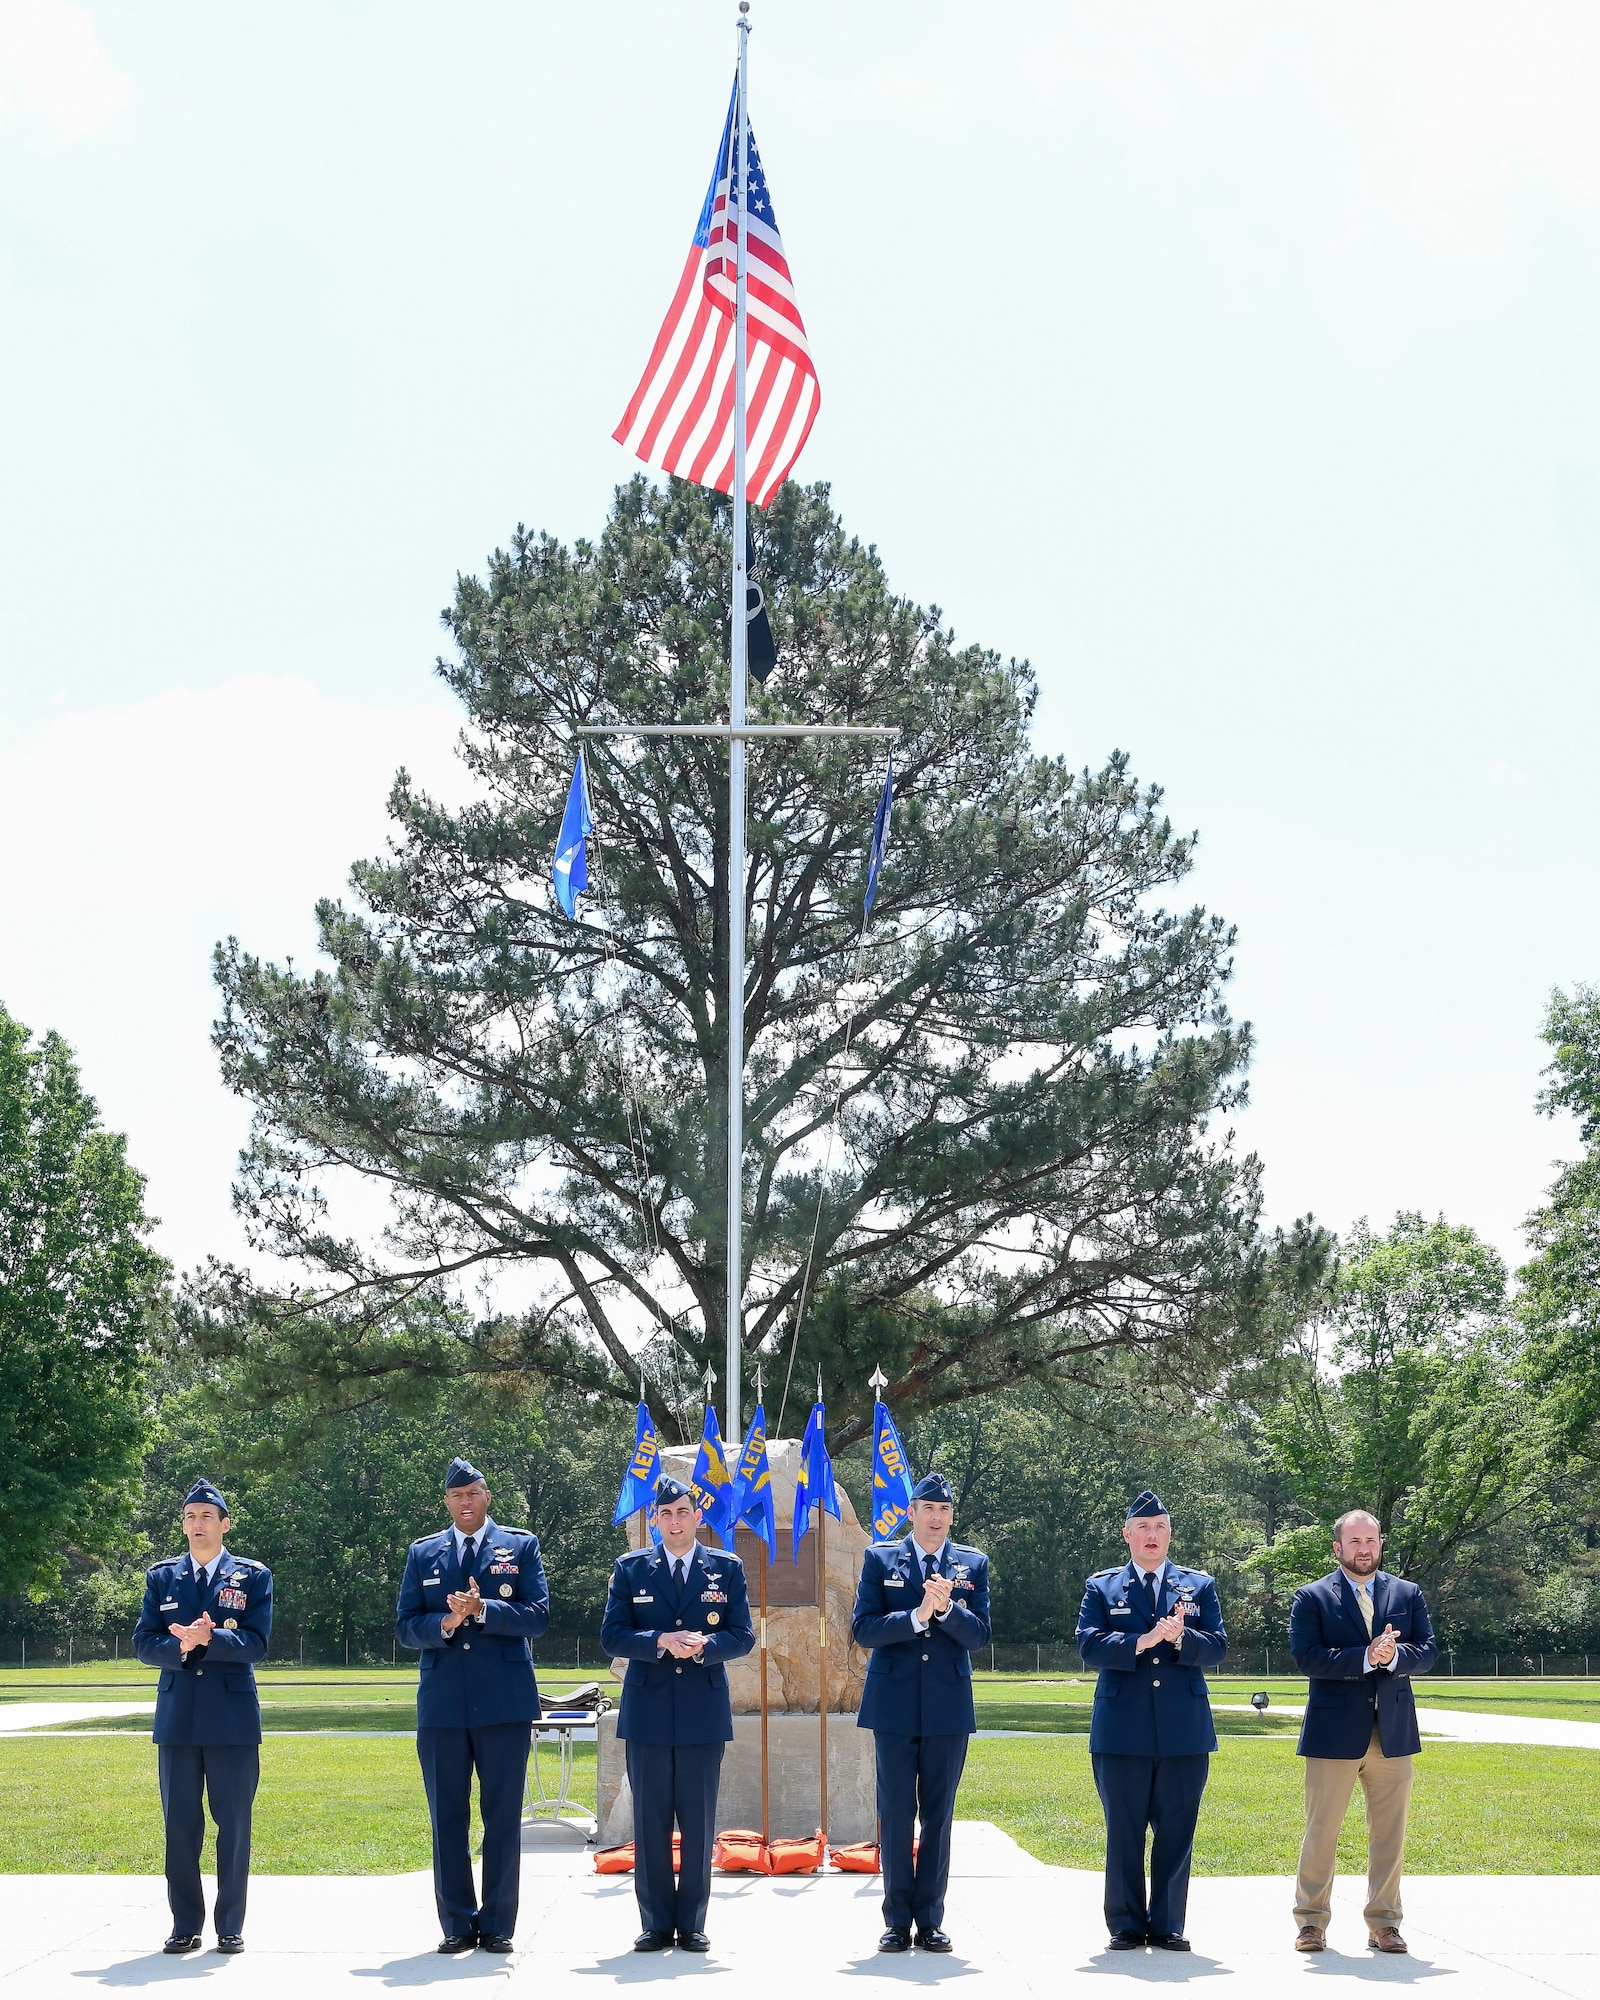 Five uniformed Airman and one civilian standing in a line clap as they sing the Air Force song